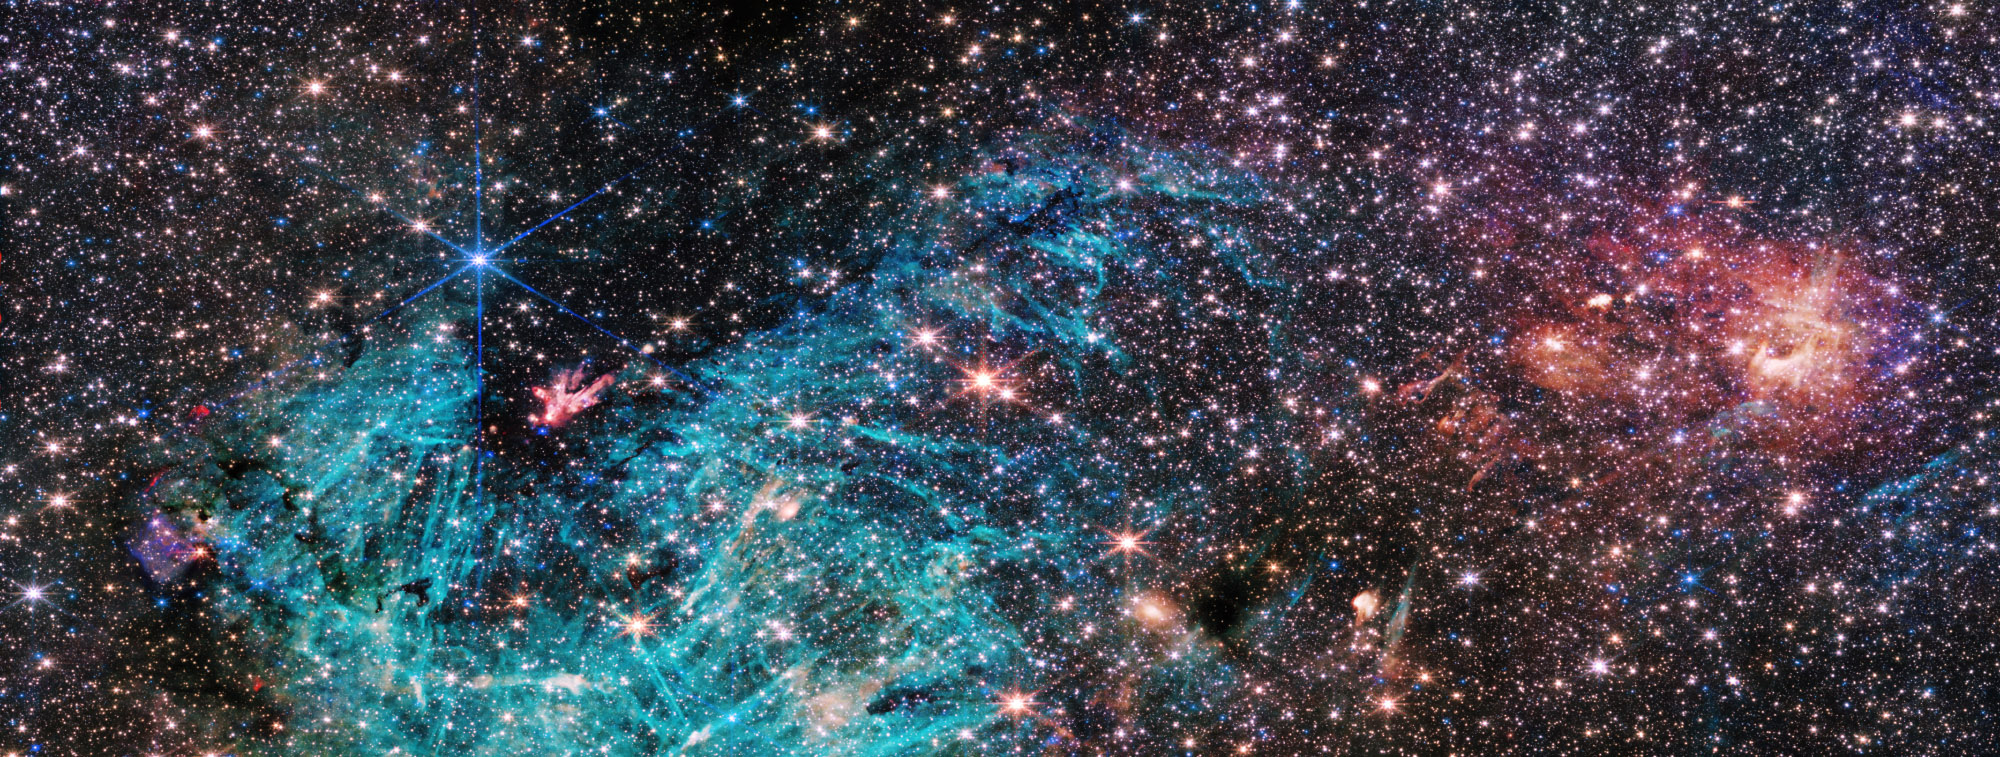 Webb image of center of the milky way